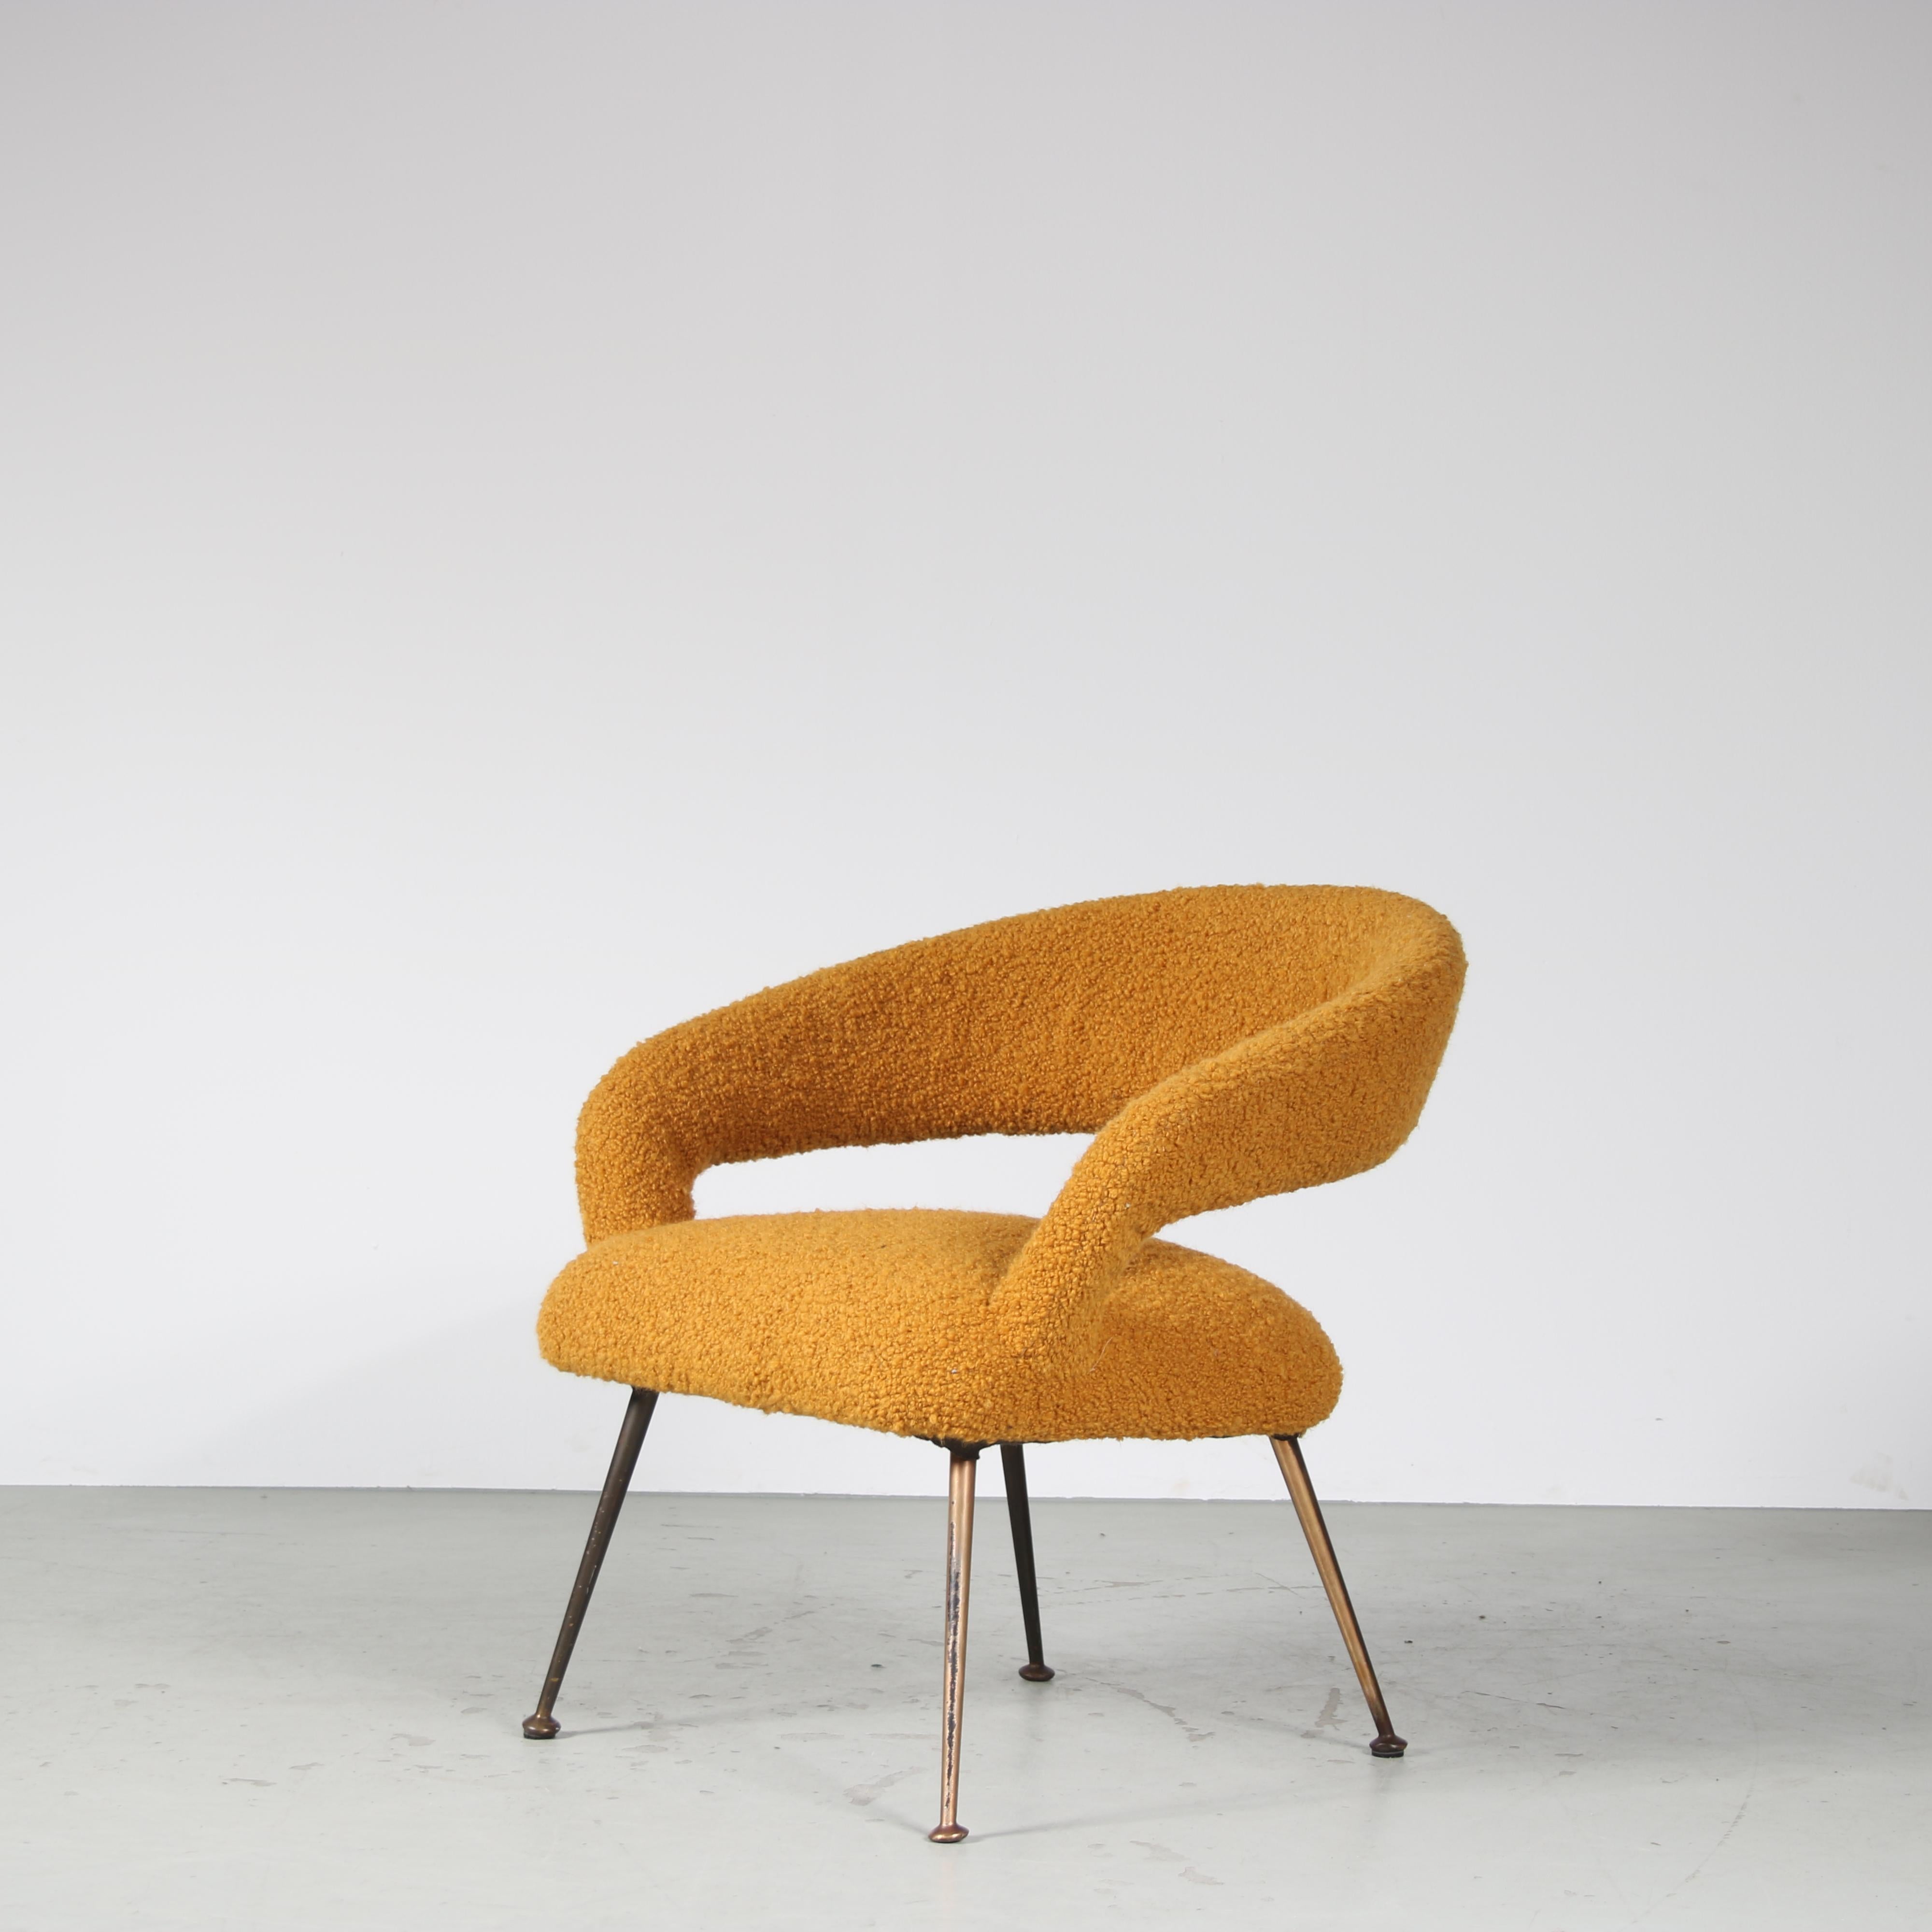 A lovely elegant easy chair, designed by Gastone Rinaldi and manufactured by RIMA in Italy around 1950.

The beautifully curved seat rests on four gently tapered brass legs. This all adds nicely to the luxurious style of the piece, fantastically